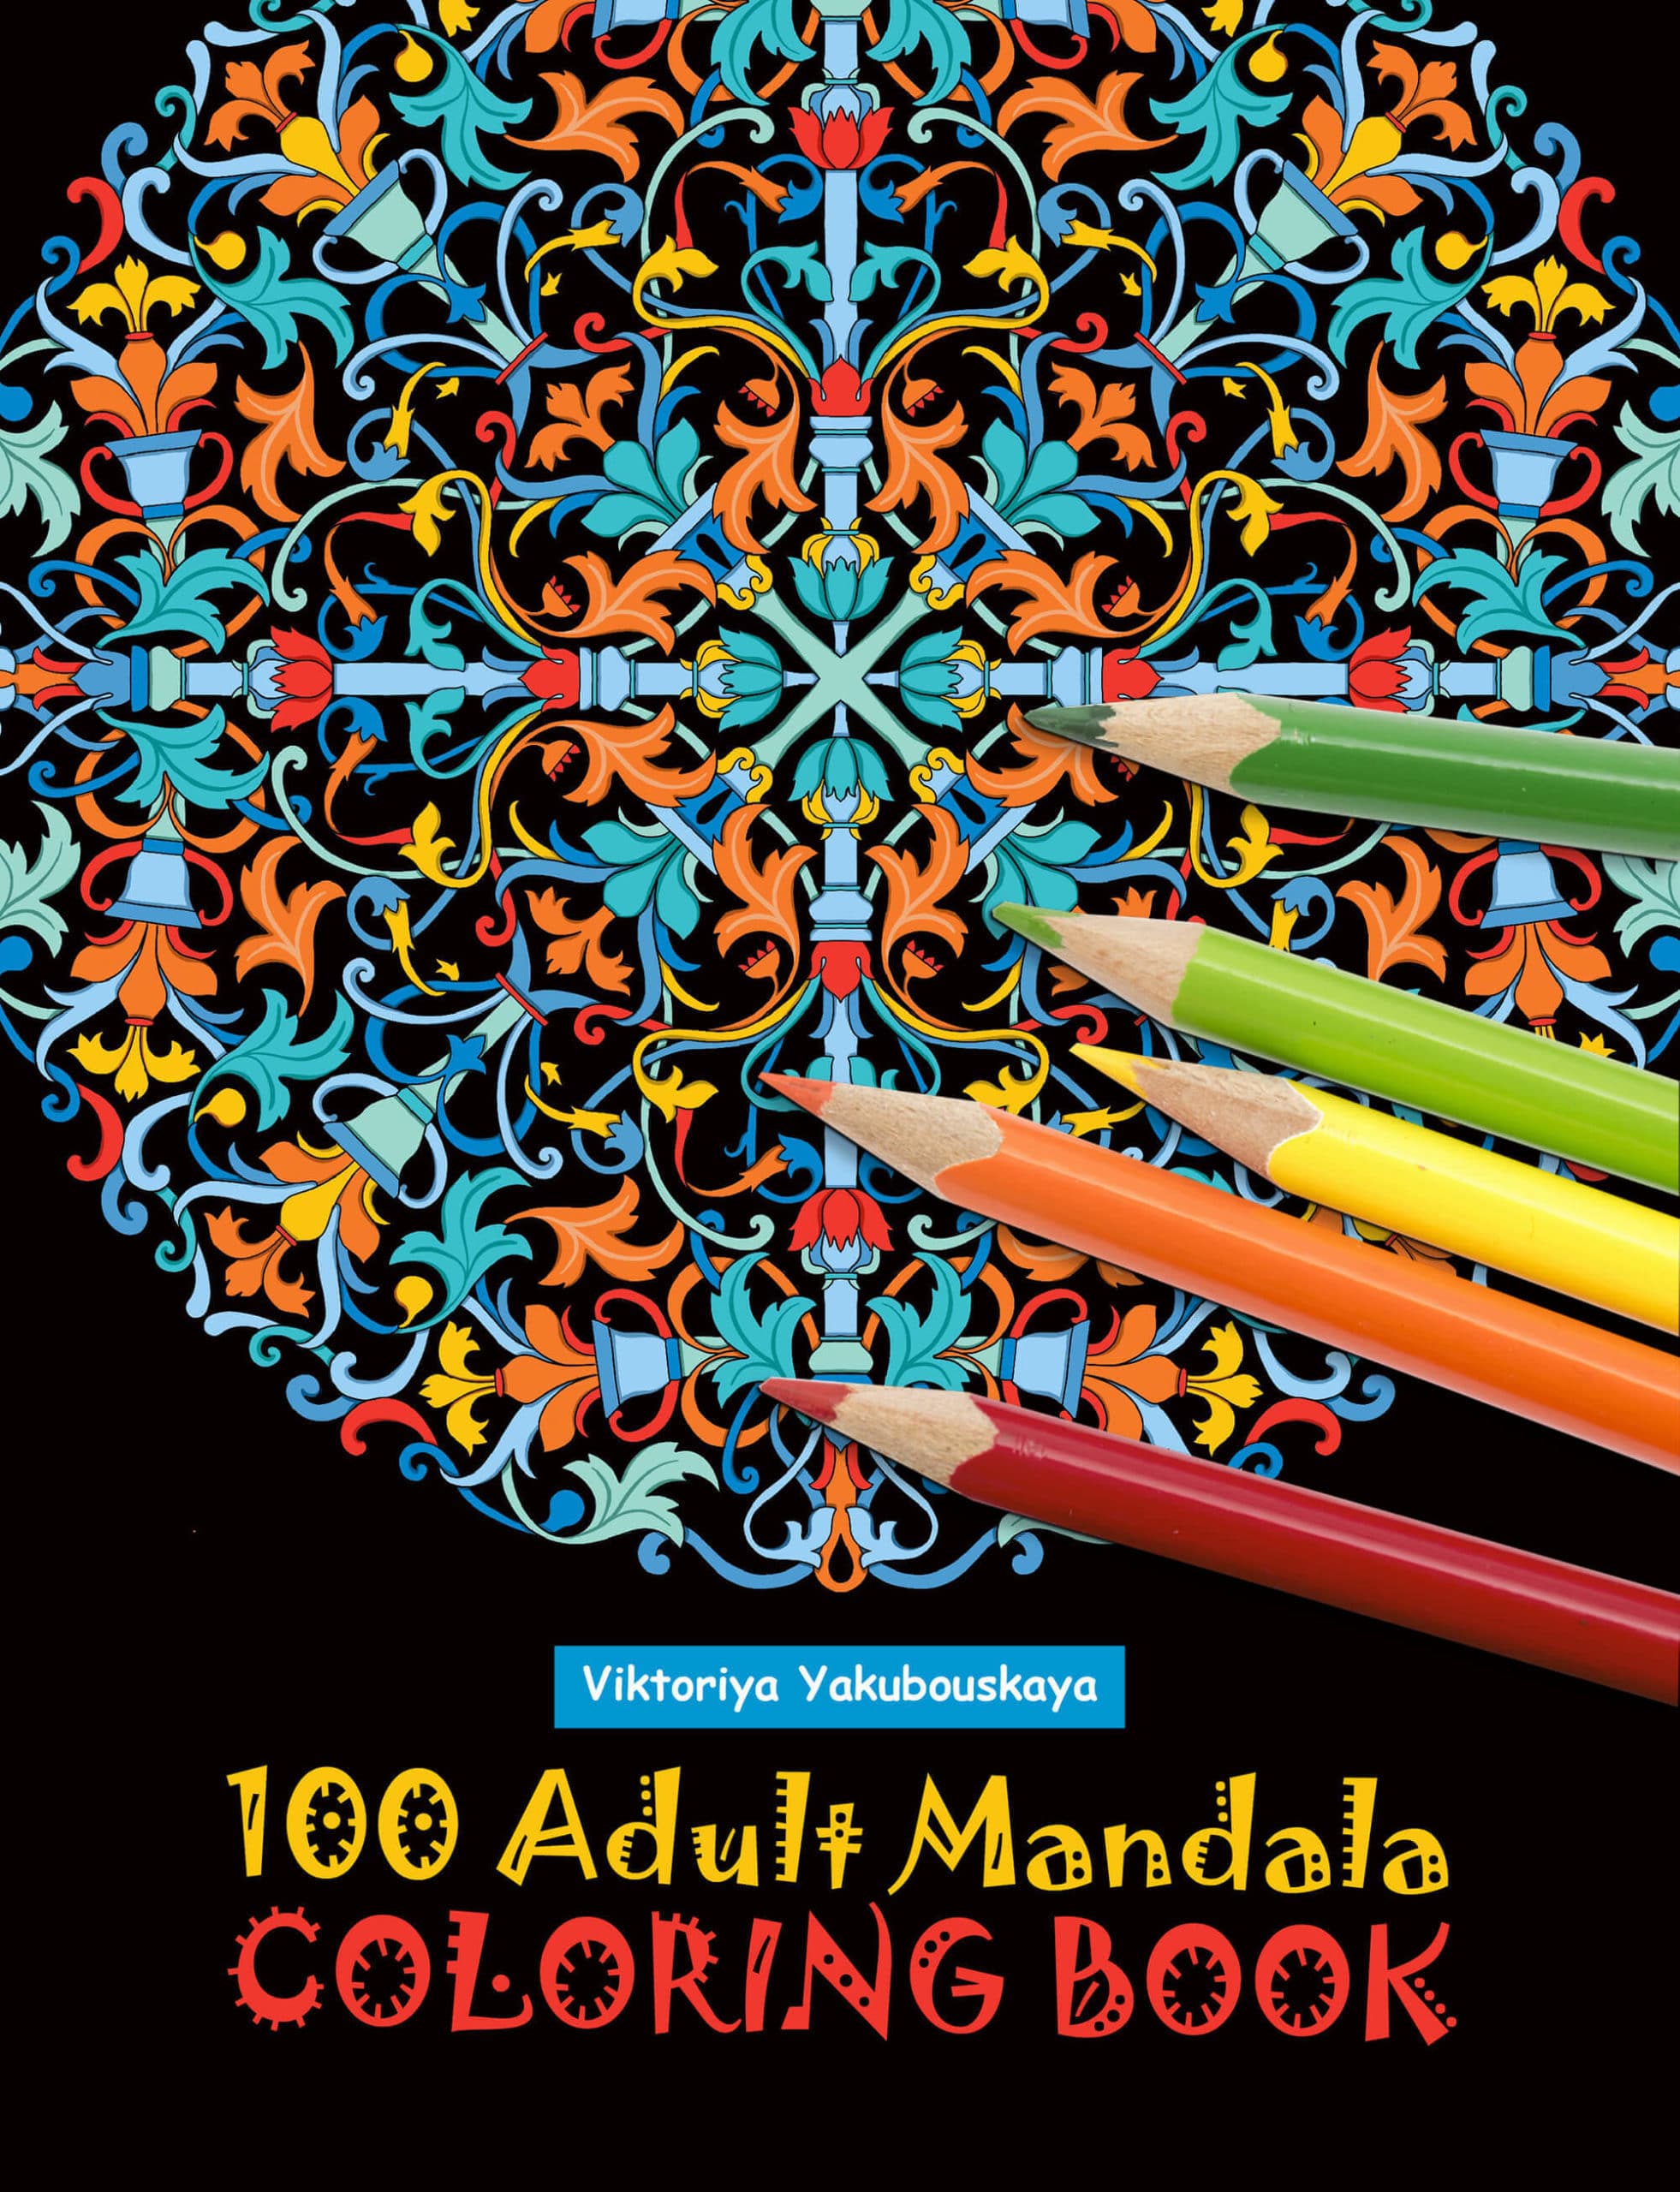 Spiral Mandalas Coloring Book for Adults: 35 One Line Spiral Mandalas for  Adults Relaxation and Stress Relief Vol.2 (One Line Spiral Mandalas  Coloring Books for Adults Relaxation and Stress Relief): Happiness,  Intergalactic